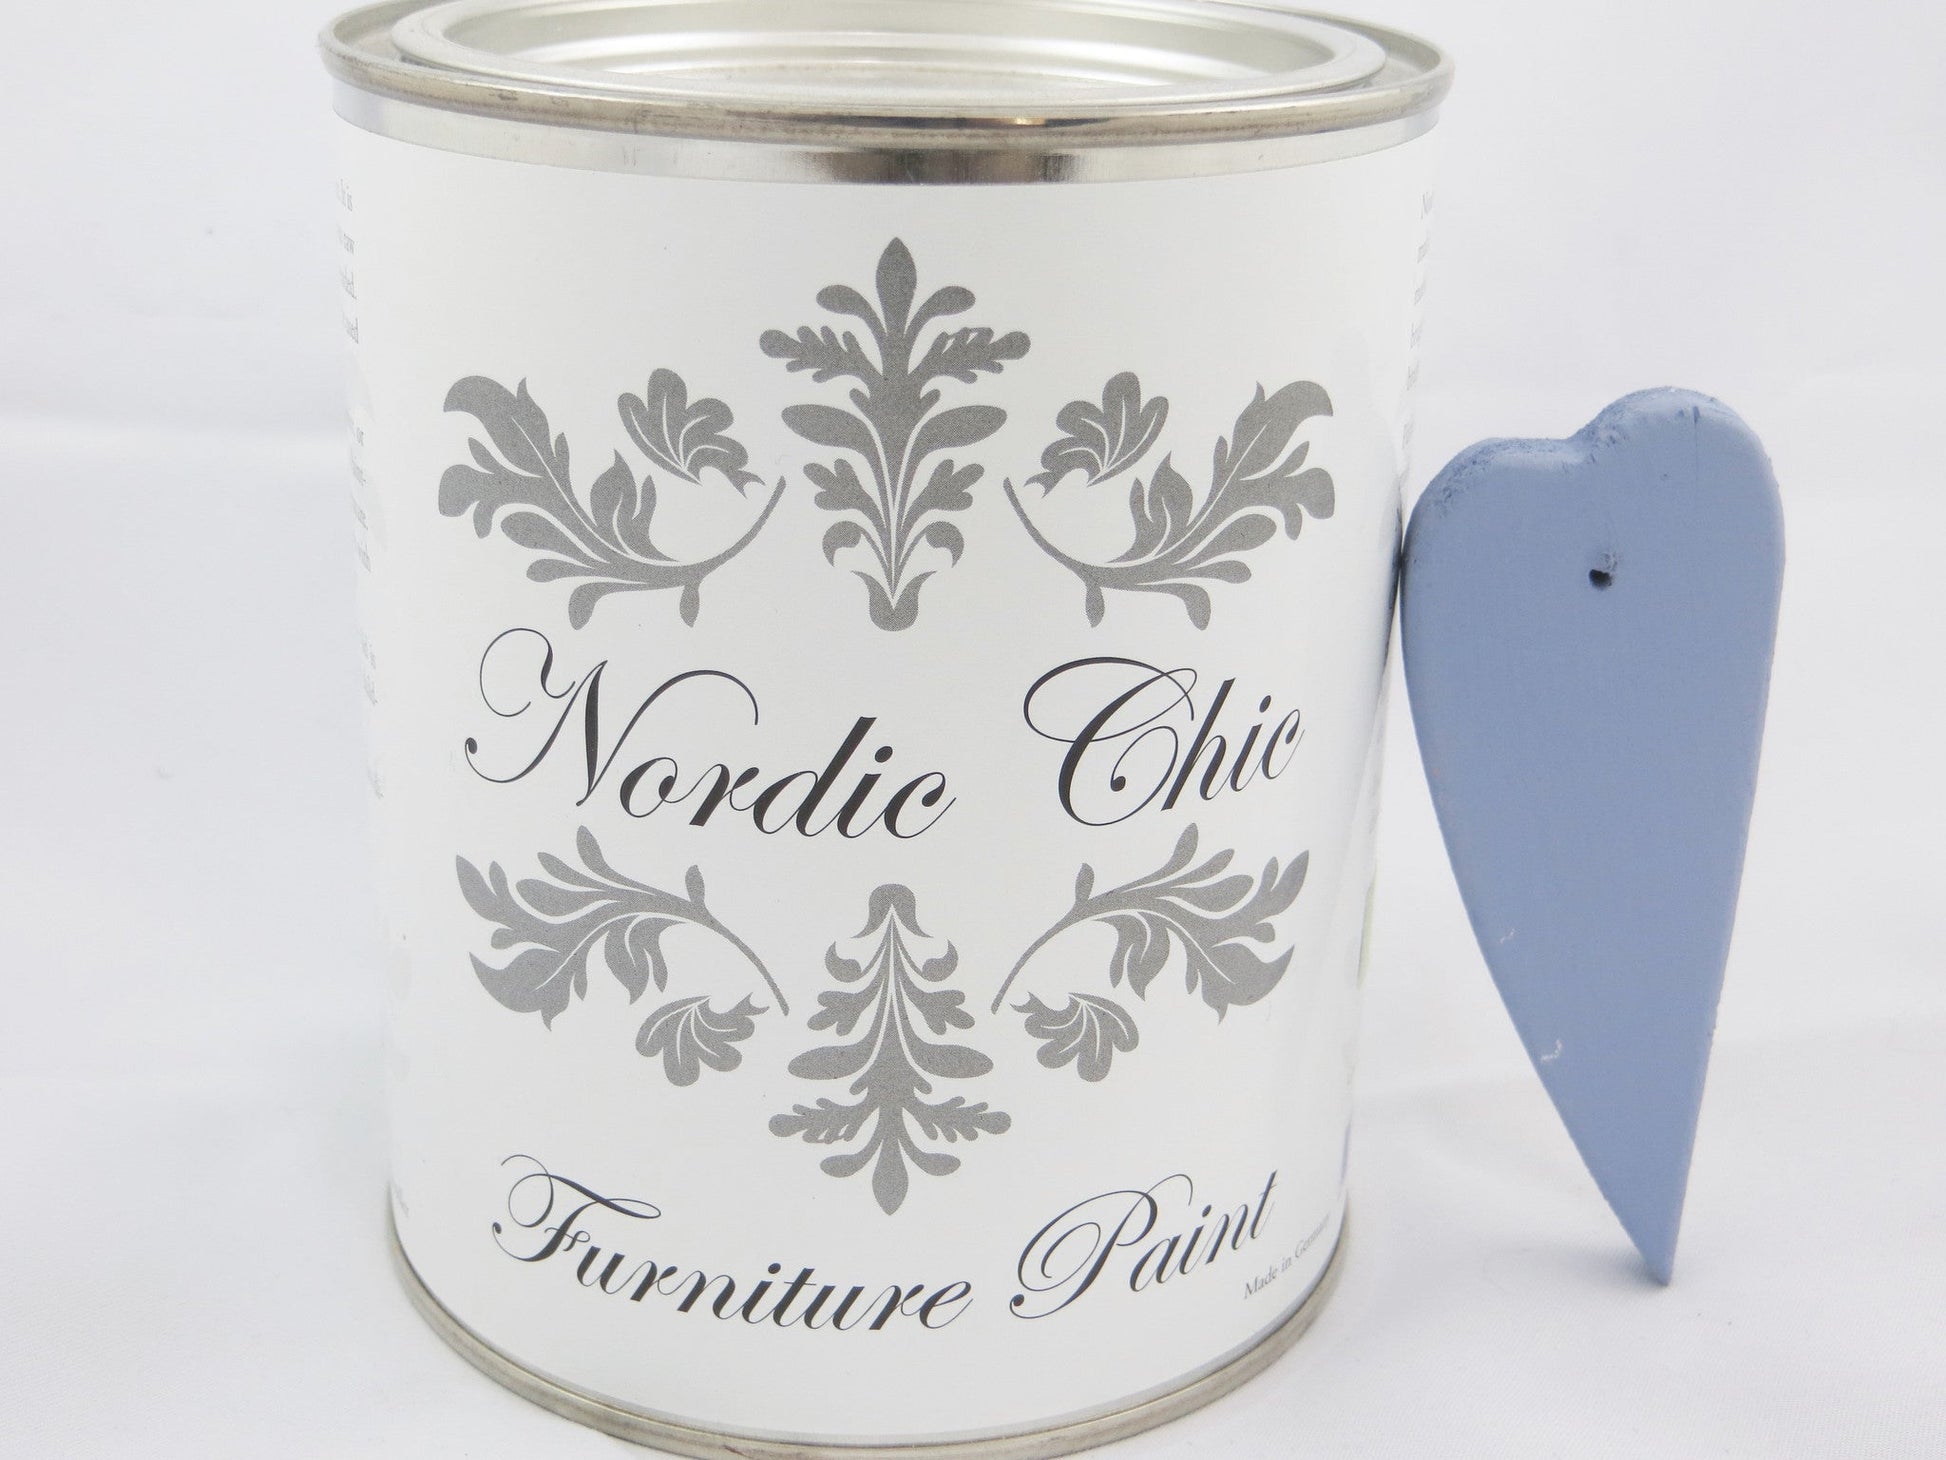 Nordic Chic Furniture Paint - Blue Jeans - Nordic Chic®